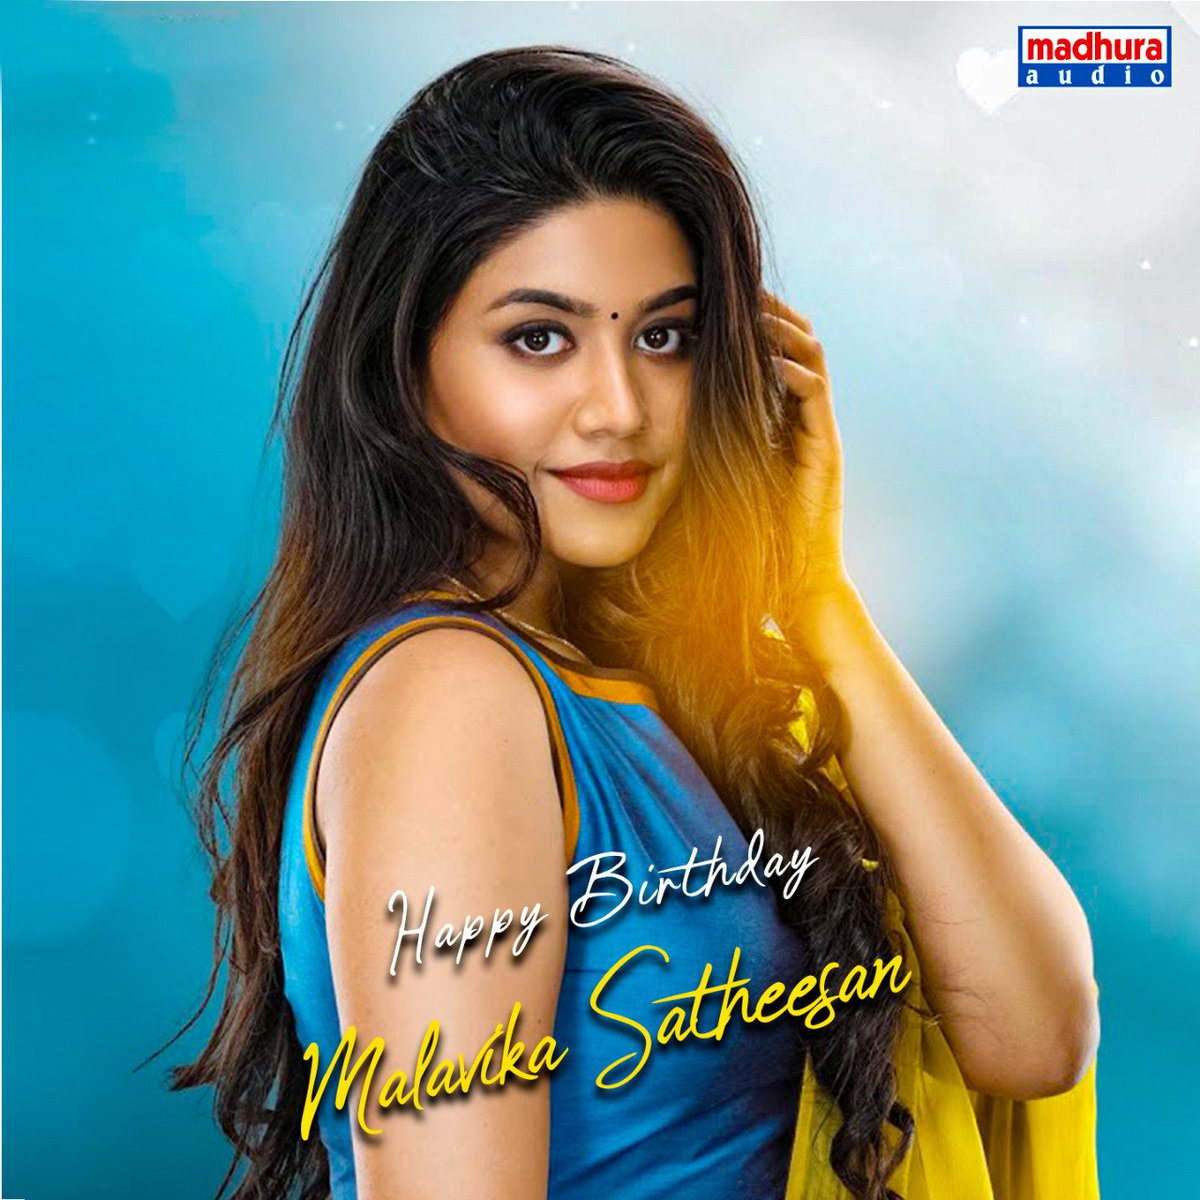 Join Us In Wishing The Beautiful Actress @malavika2831 A Very Happy Birthday And A Great Year Ahead 🎉🎊 Listen To This Melodious Jukebox : youtu.be/H5chC7OeDMk #HappyBirthdayMalavikasatheesan #HBDMalavikasatheesan #Malavikasatheesan @MadhuraAudio